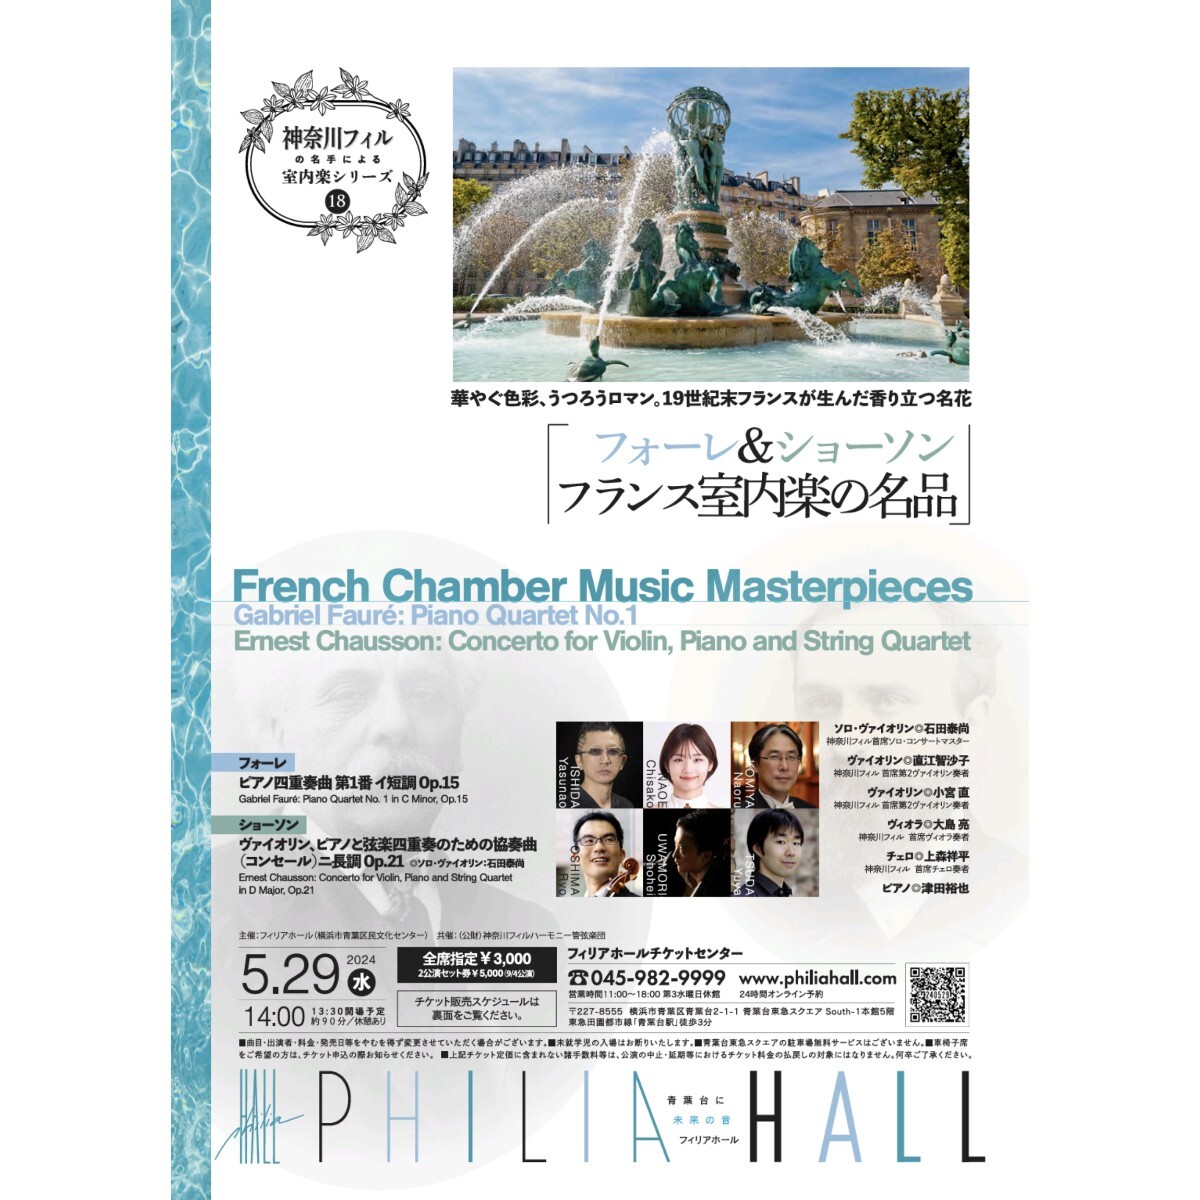  four re& show son: France chamber music. name goods fi rear hole 5 month 29 day ticket Kanagawa Phil concert complete sale .. Yokohama city blue leaf district stone rice field . furthermore 